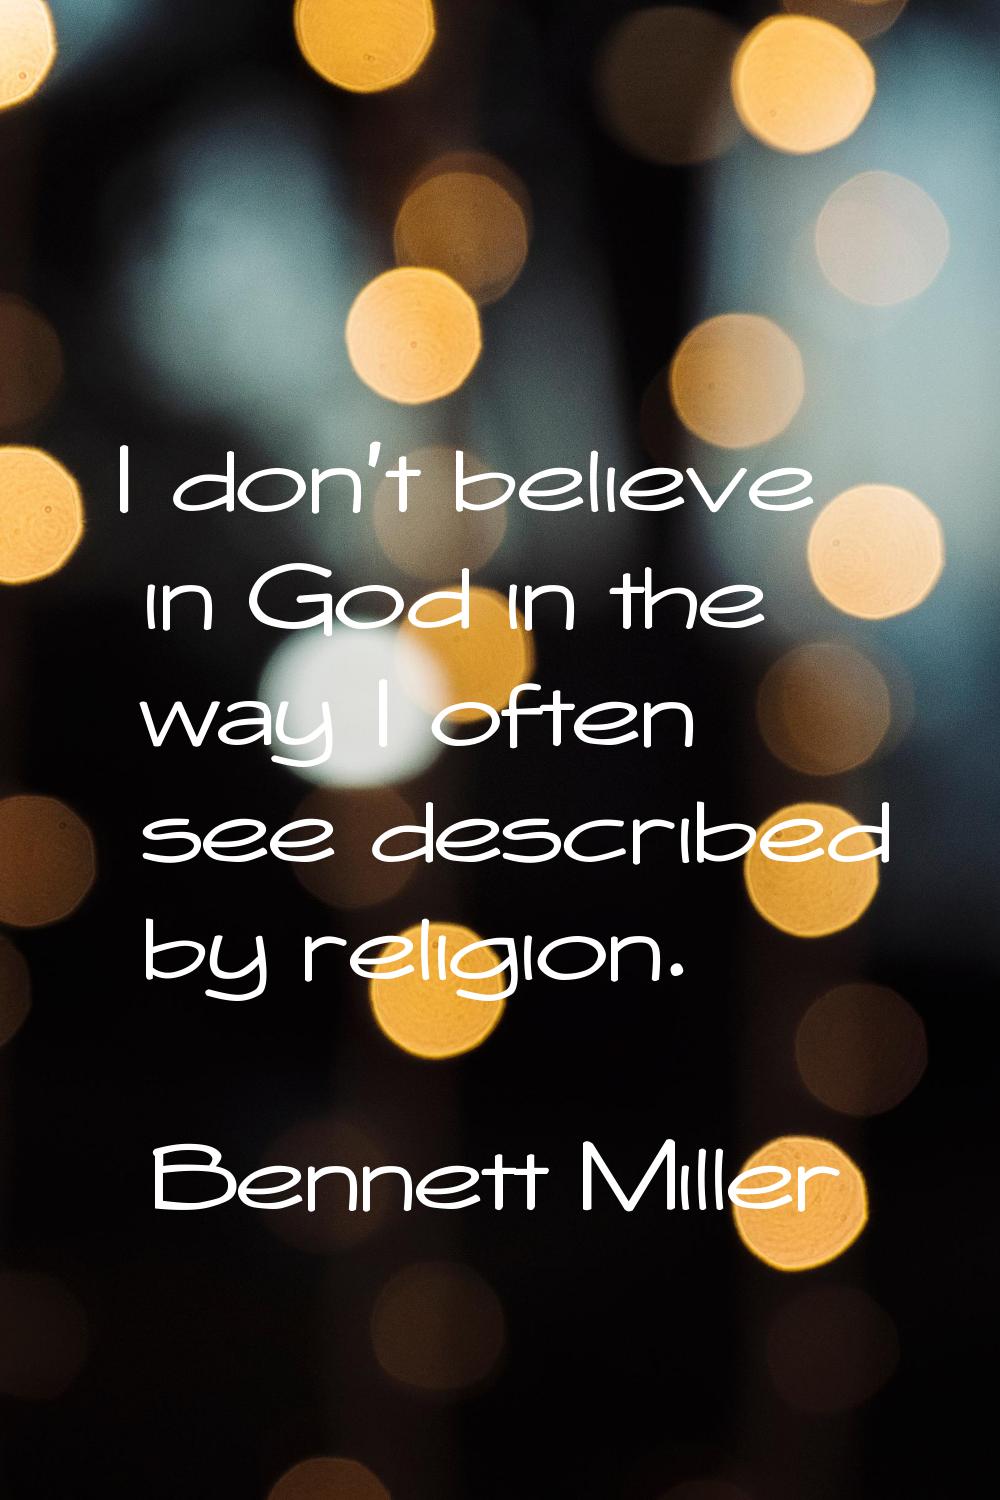 I don't believe in God in the way I often see described by religion.